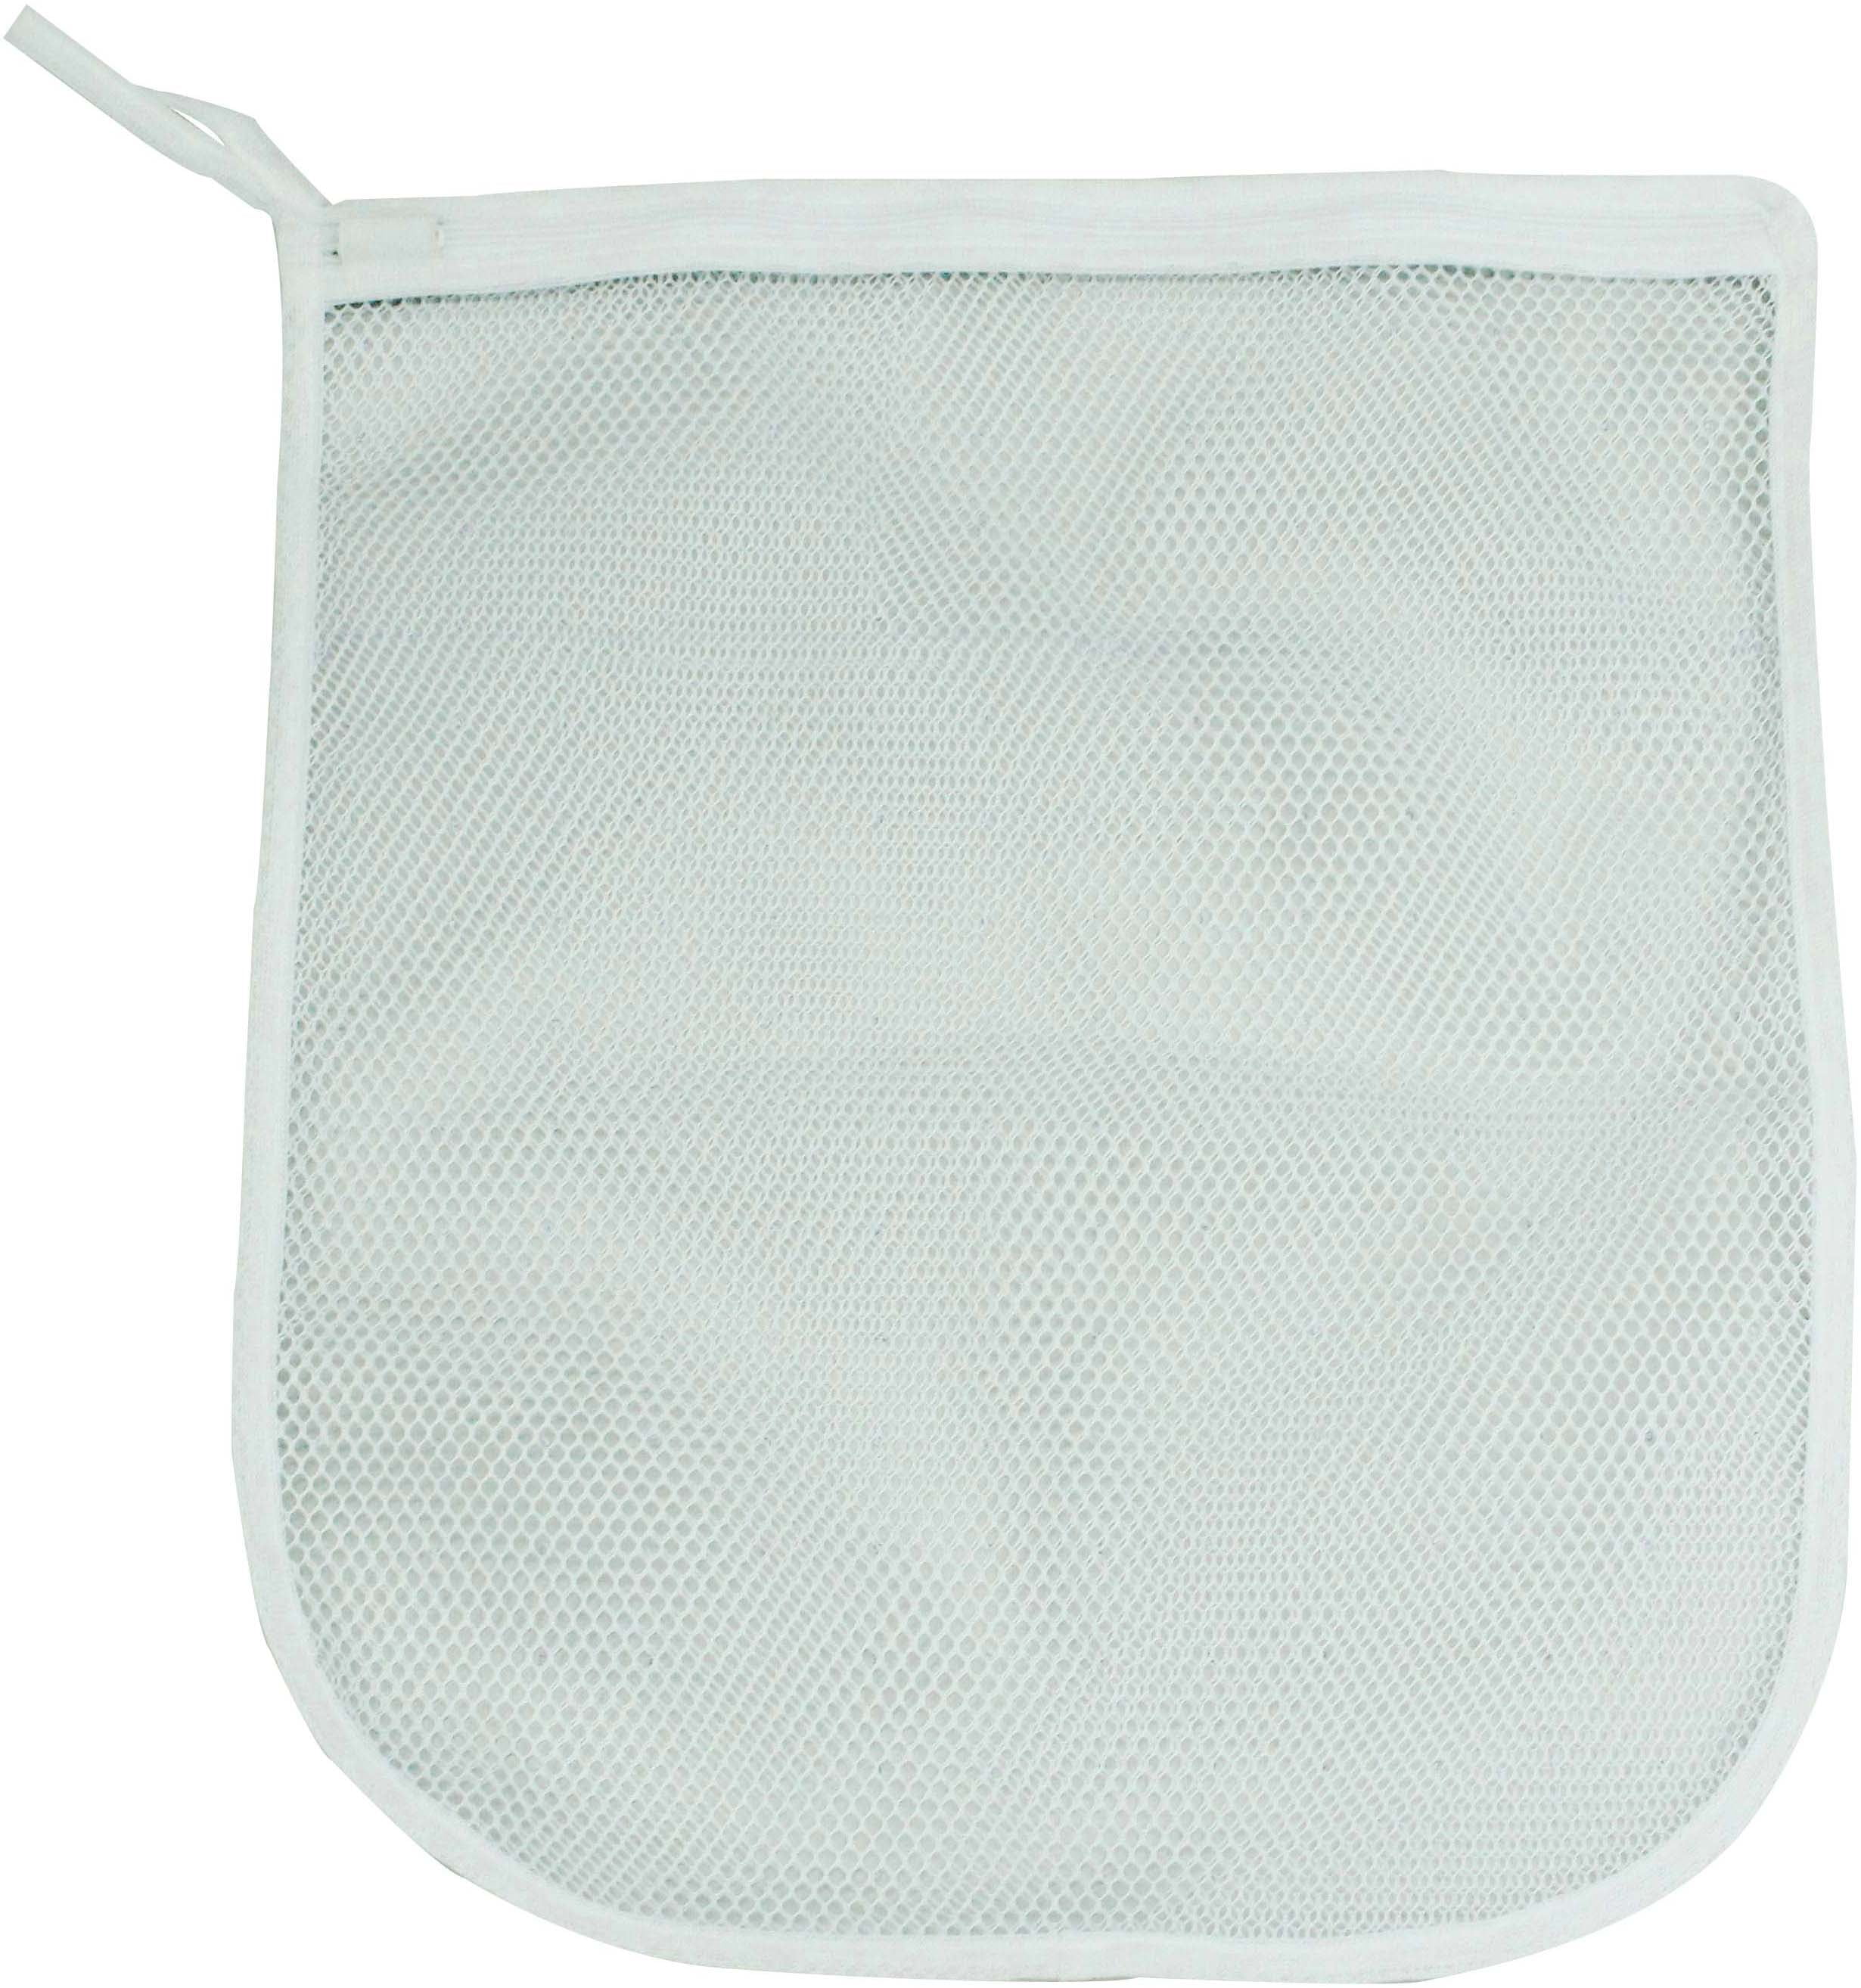 Mainstays Delicates White Polyester Mesh Bag with Zipper Closure, Size: 15  x 18